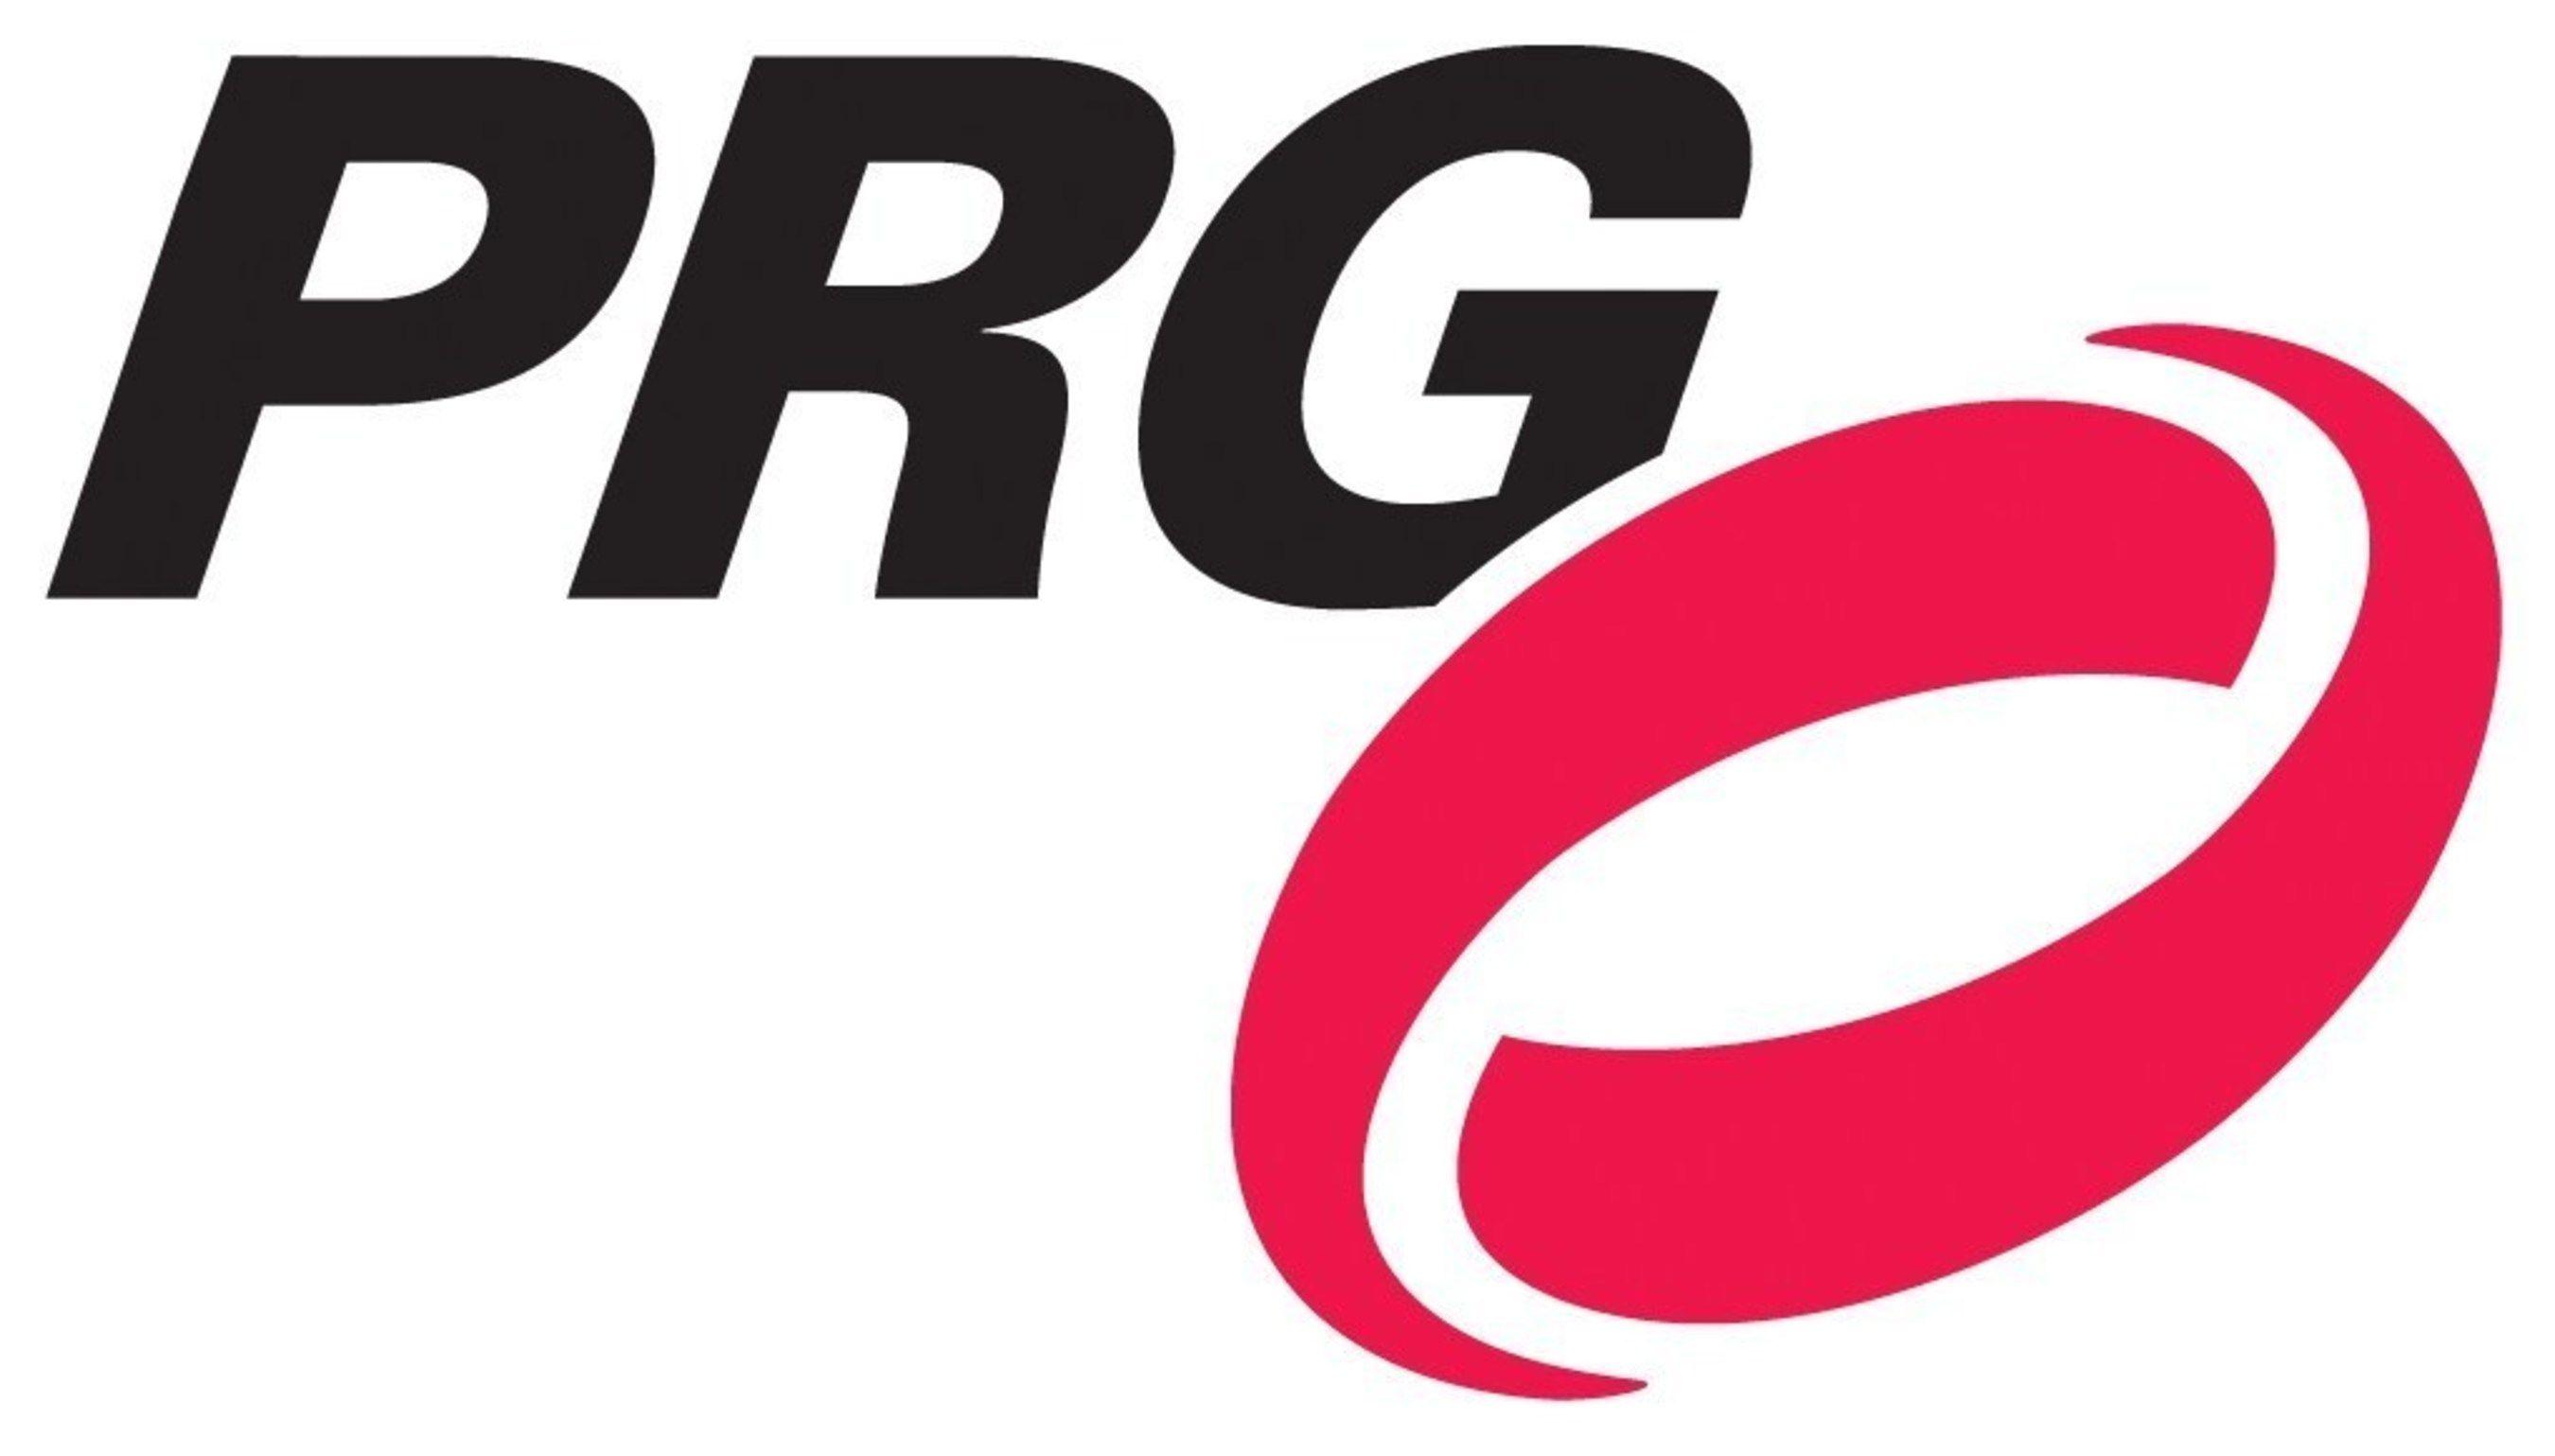 PRG Logo - Production Resource Group Completes Acquisition of Assets of DPS, Inc